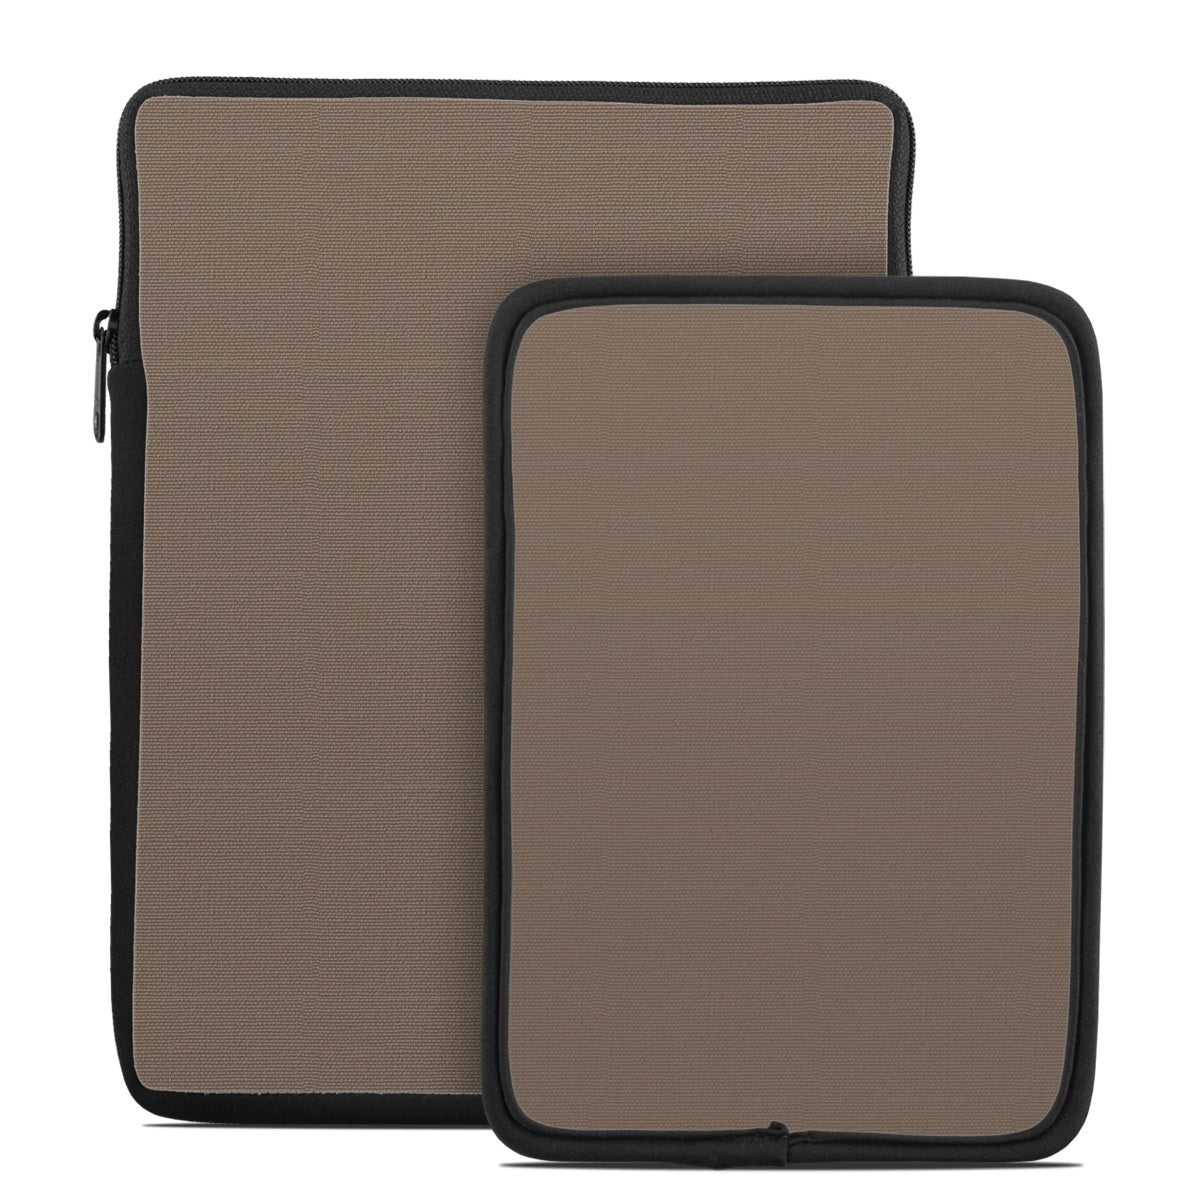 Solid State Flat Dark Earth - Tablet Sleeve